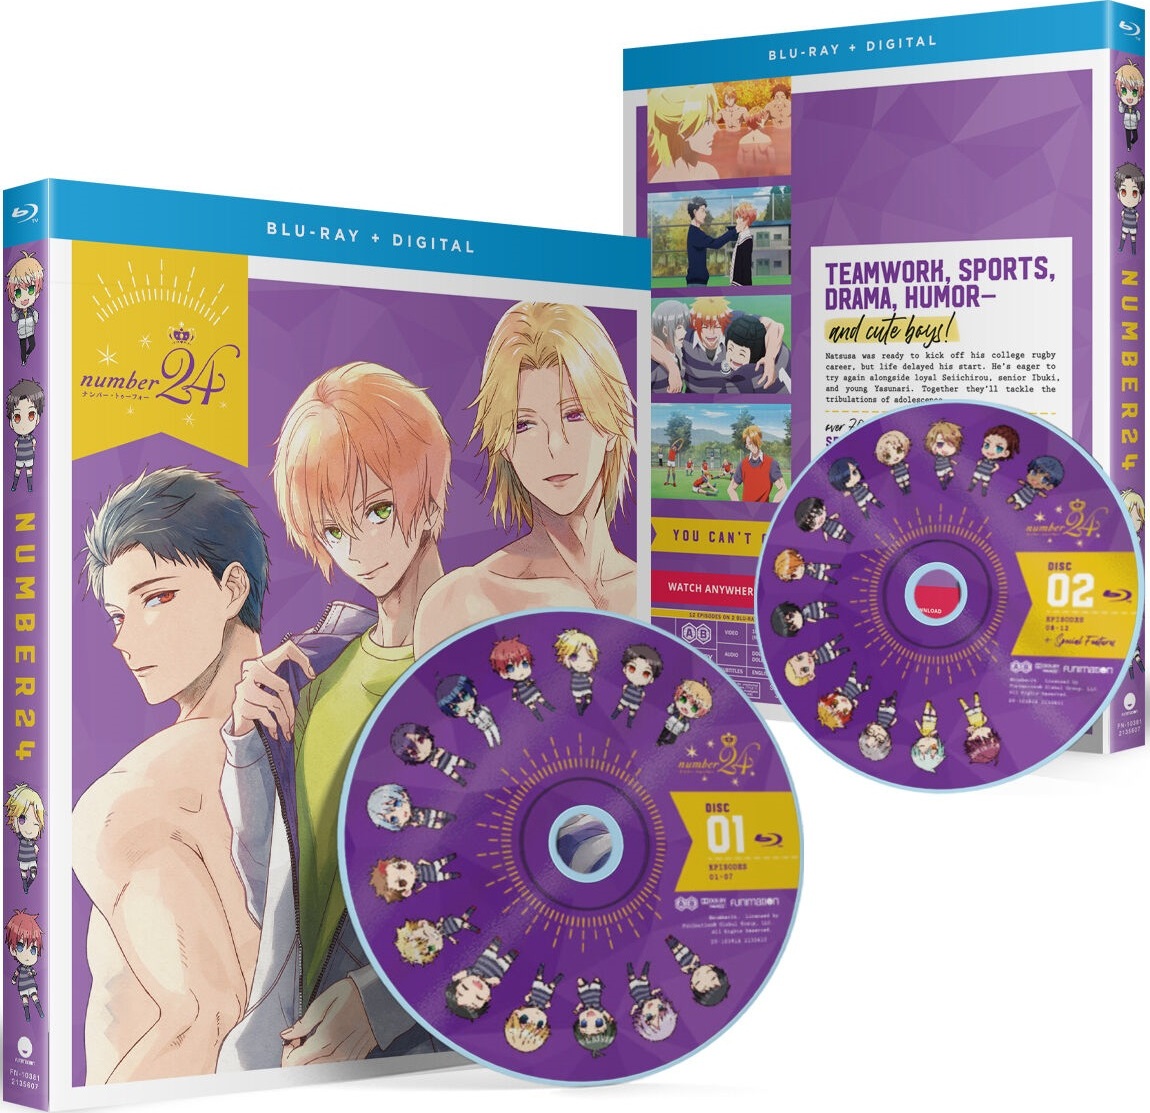 Number24: The Complete Series, Blu-ray, In-Stock - Buy Now